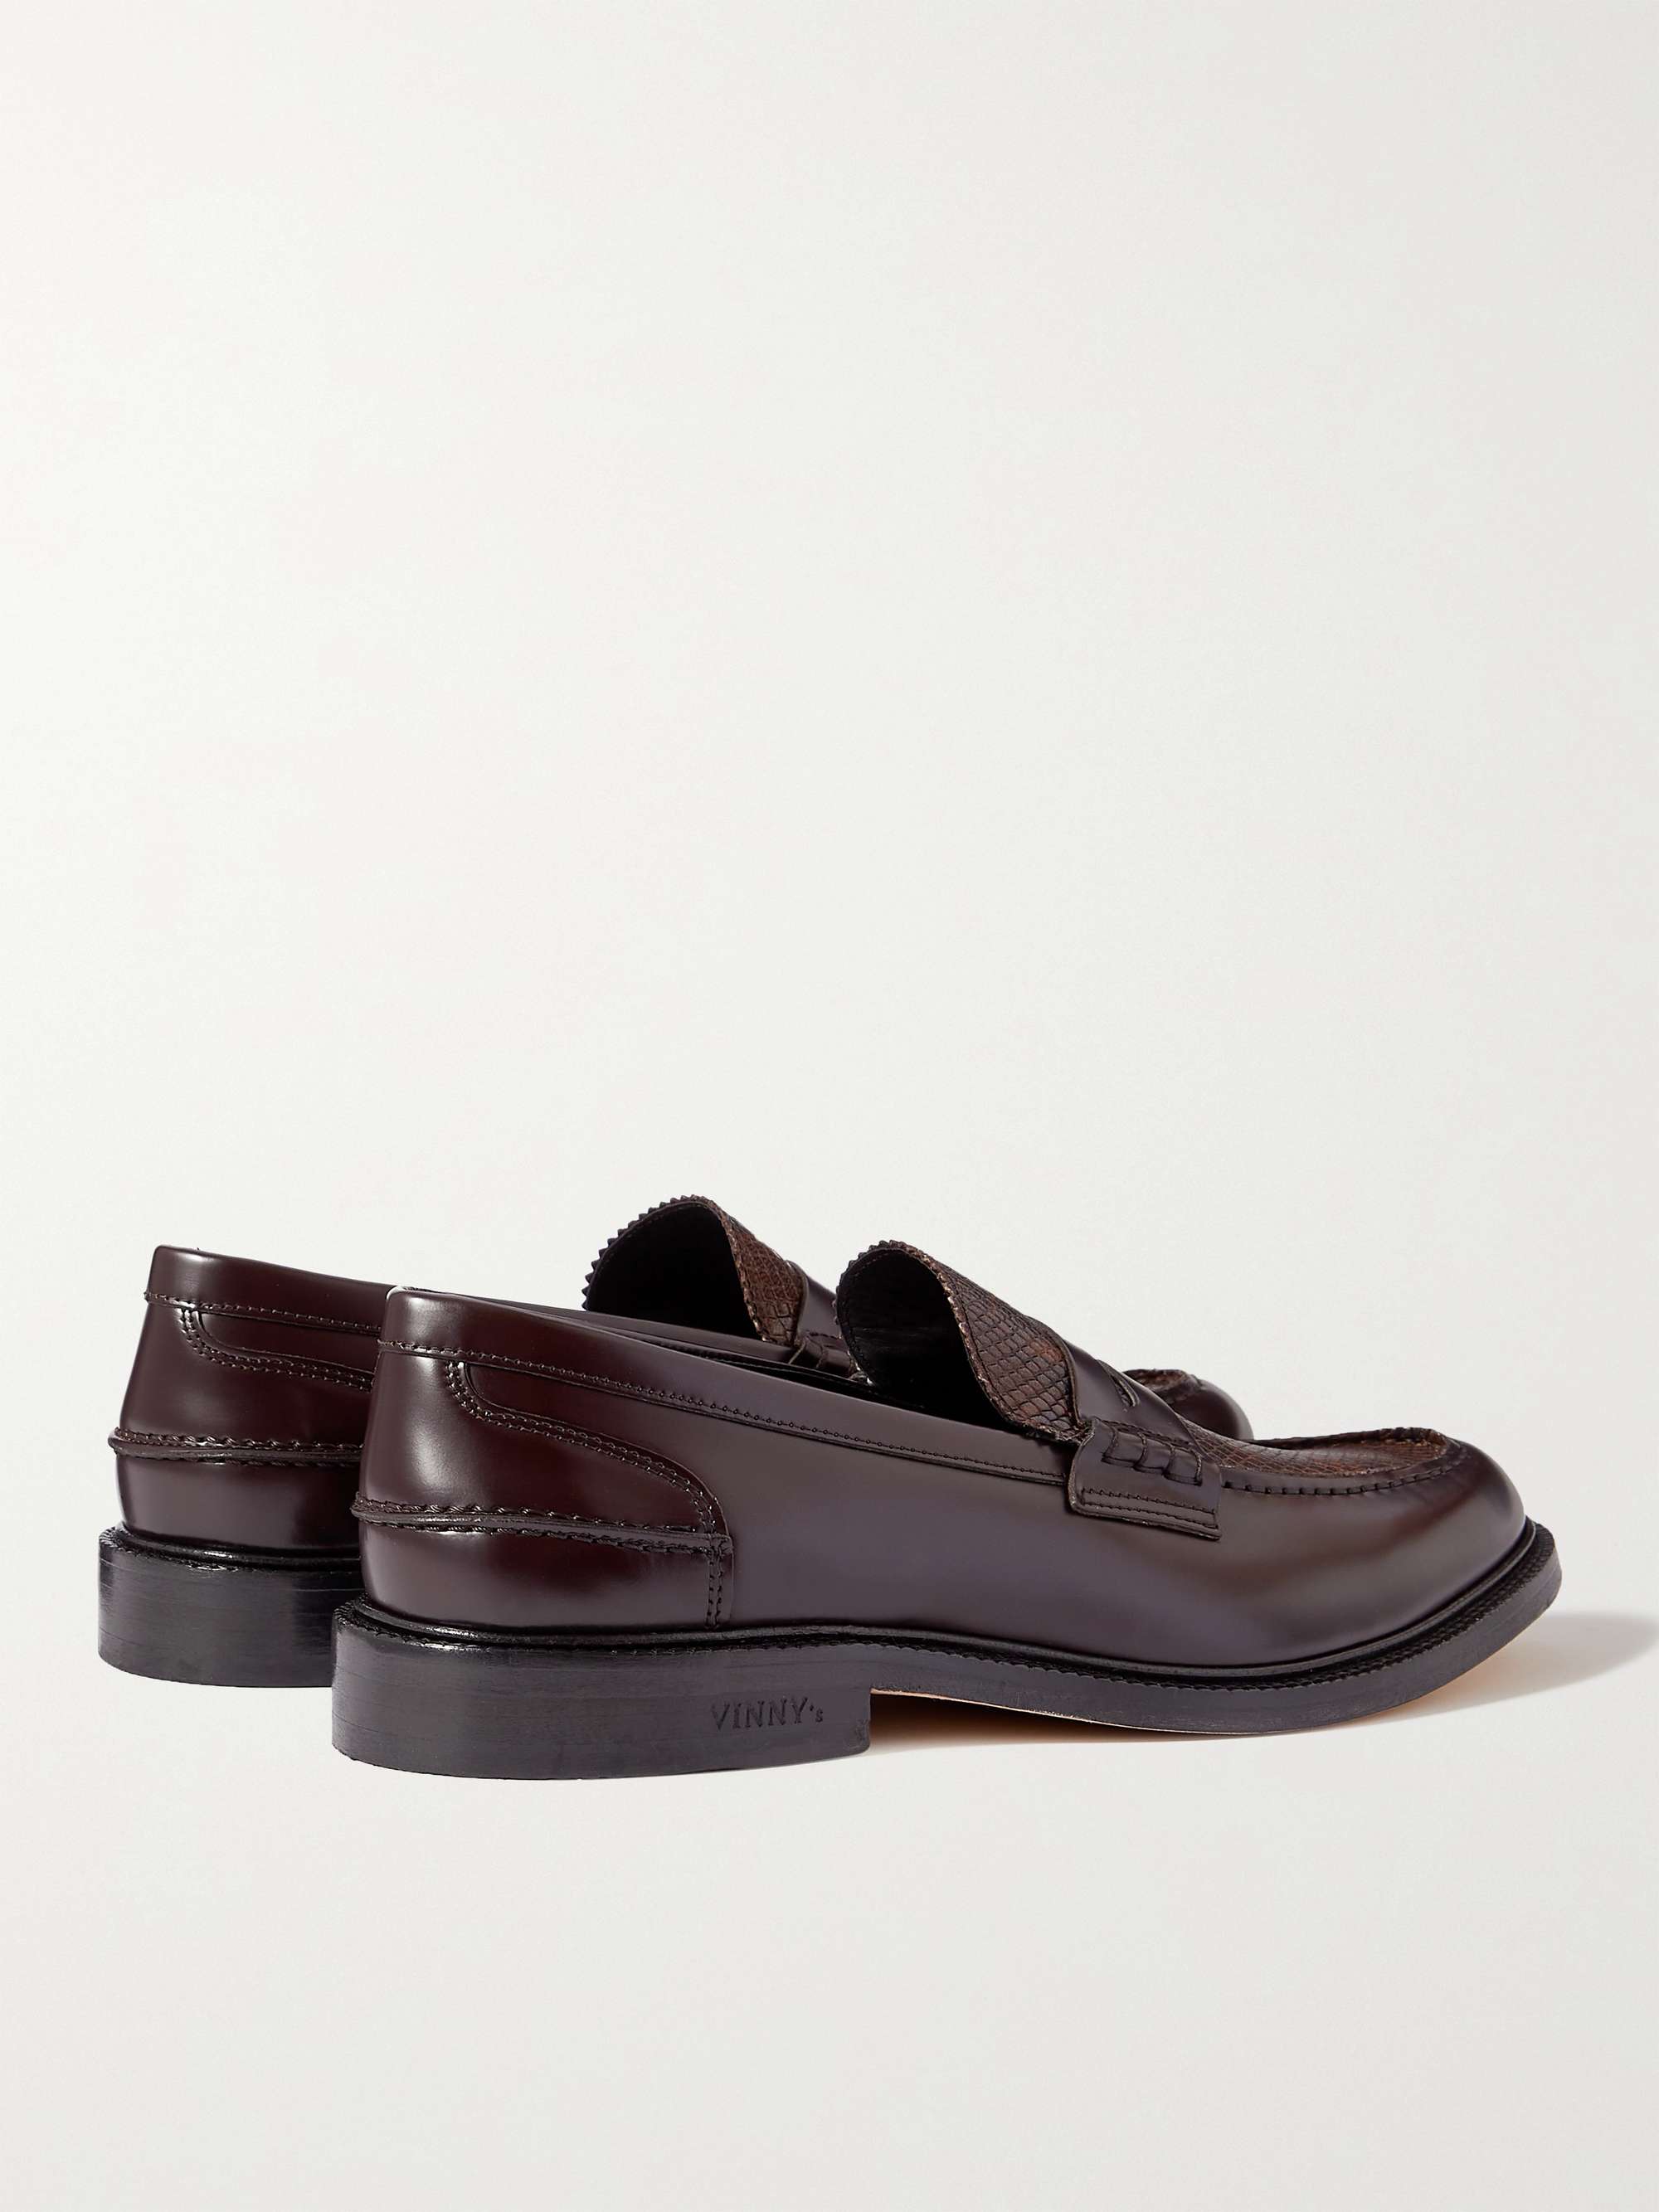 VINNY'S Power Townee Panelled Snake-Effect Leather Penny Loafers